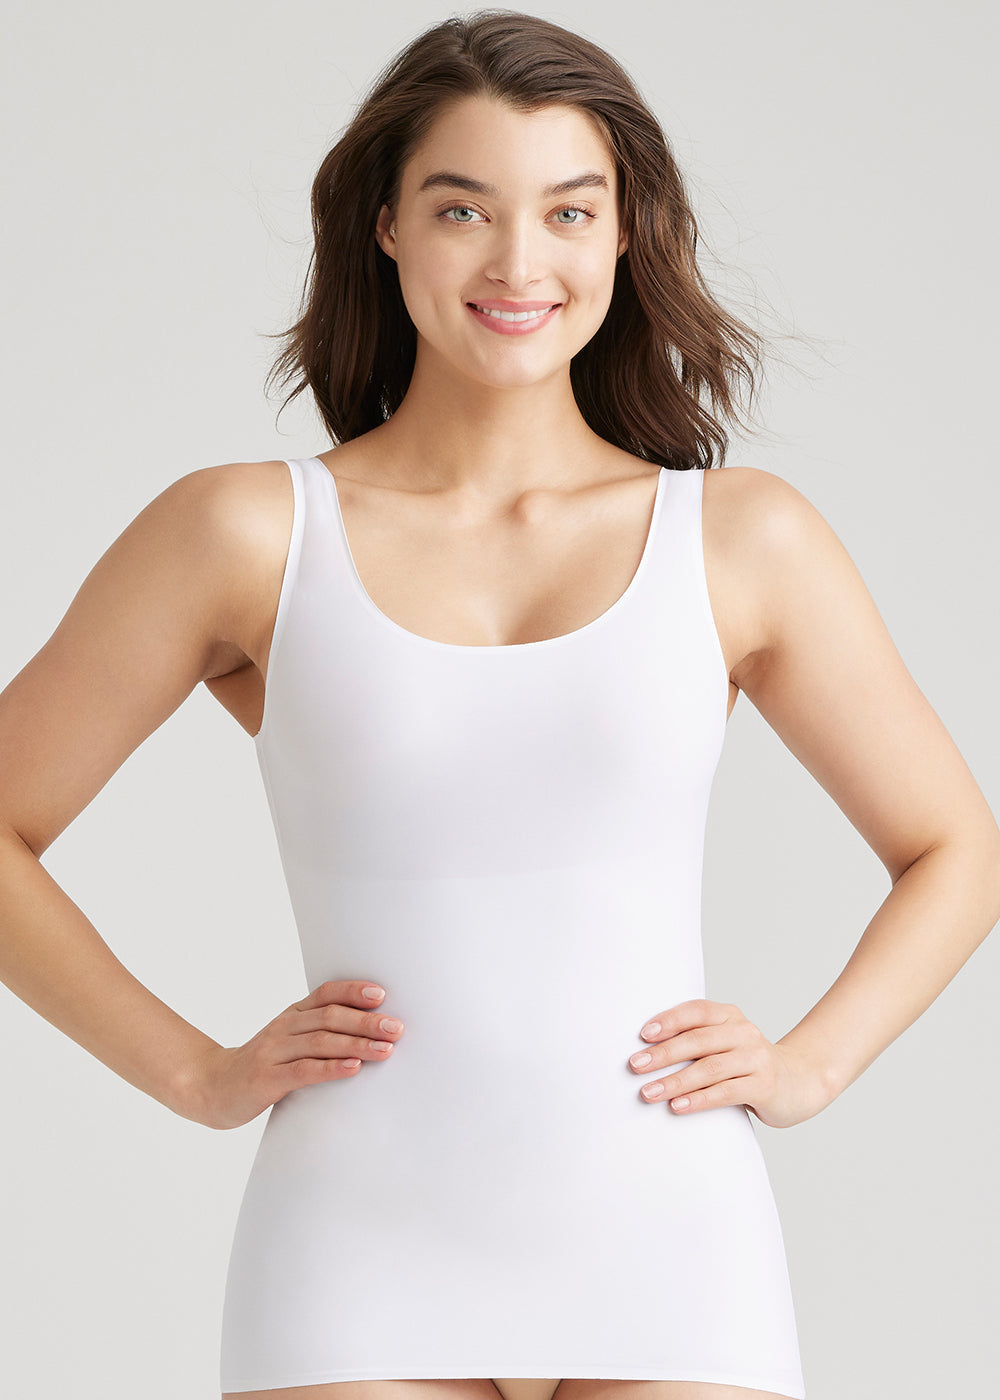 6-in-1 shaping tank in white worn by a woman standing smiling with her hands on her hips